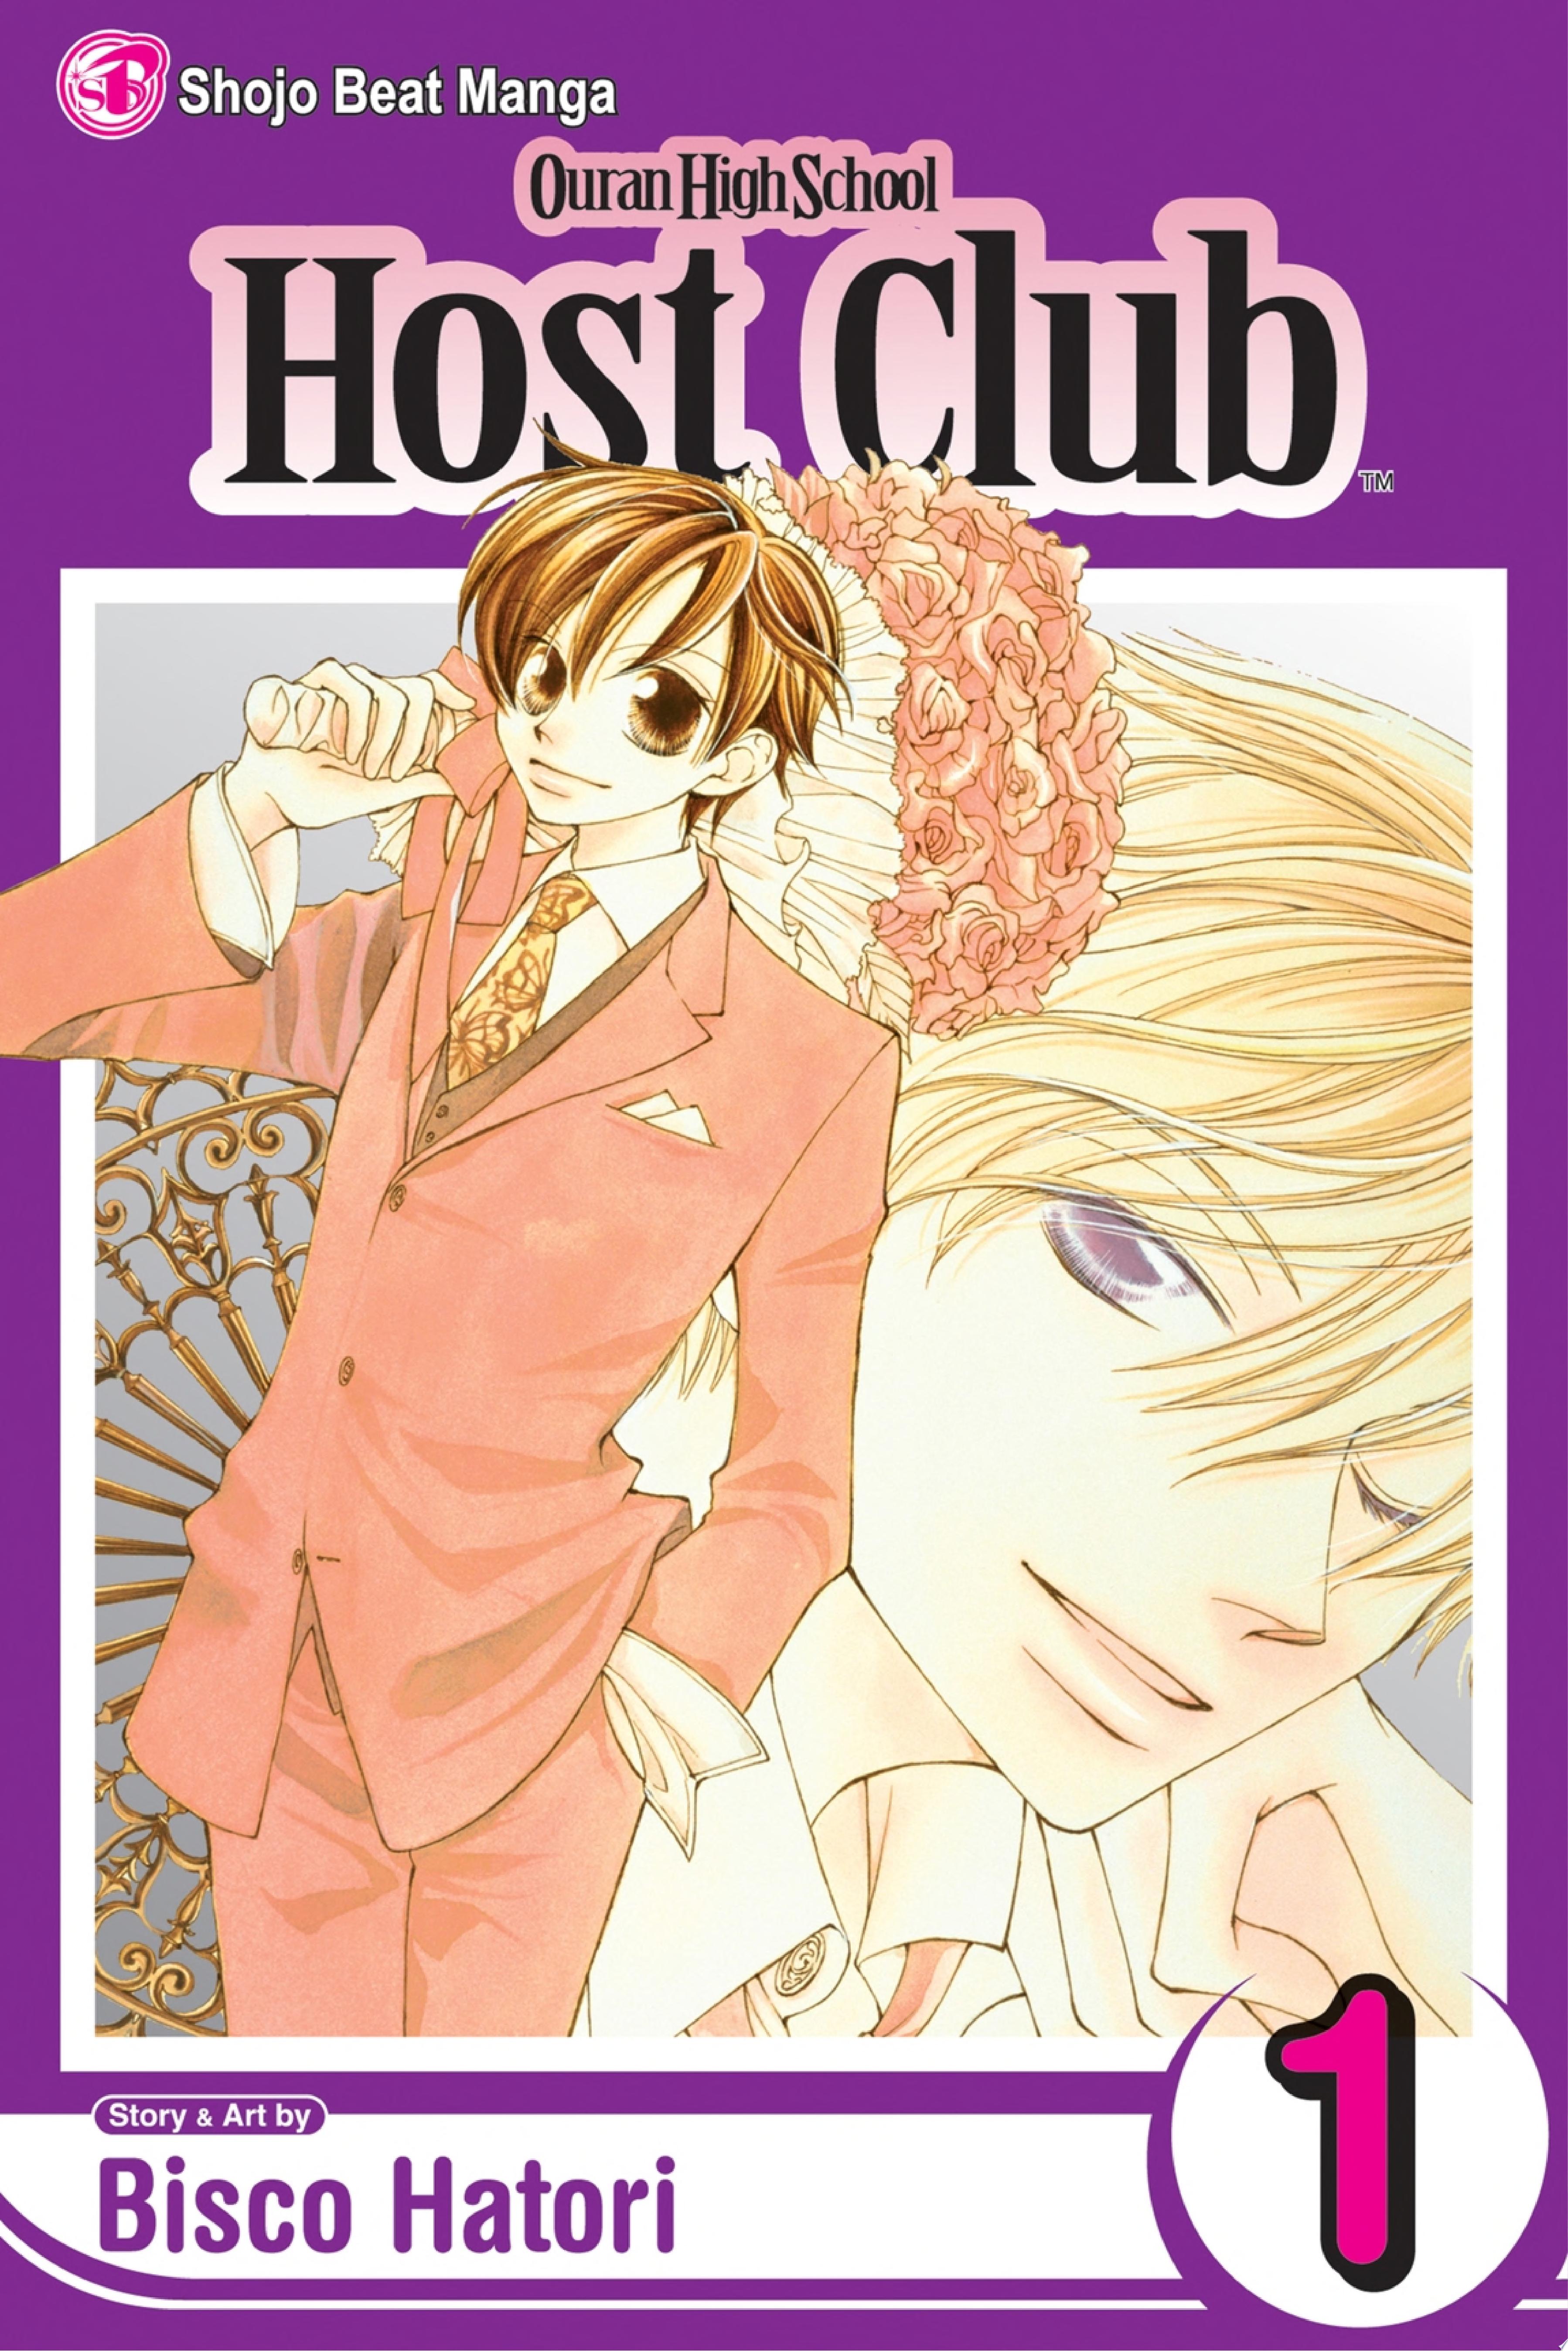 Image for "Ouran High School Host Club, Vol. 1"